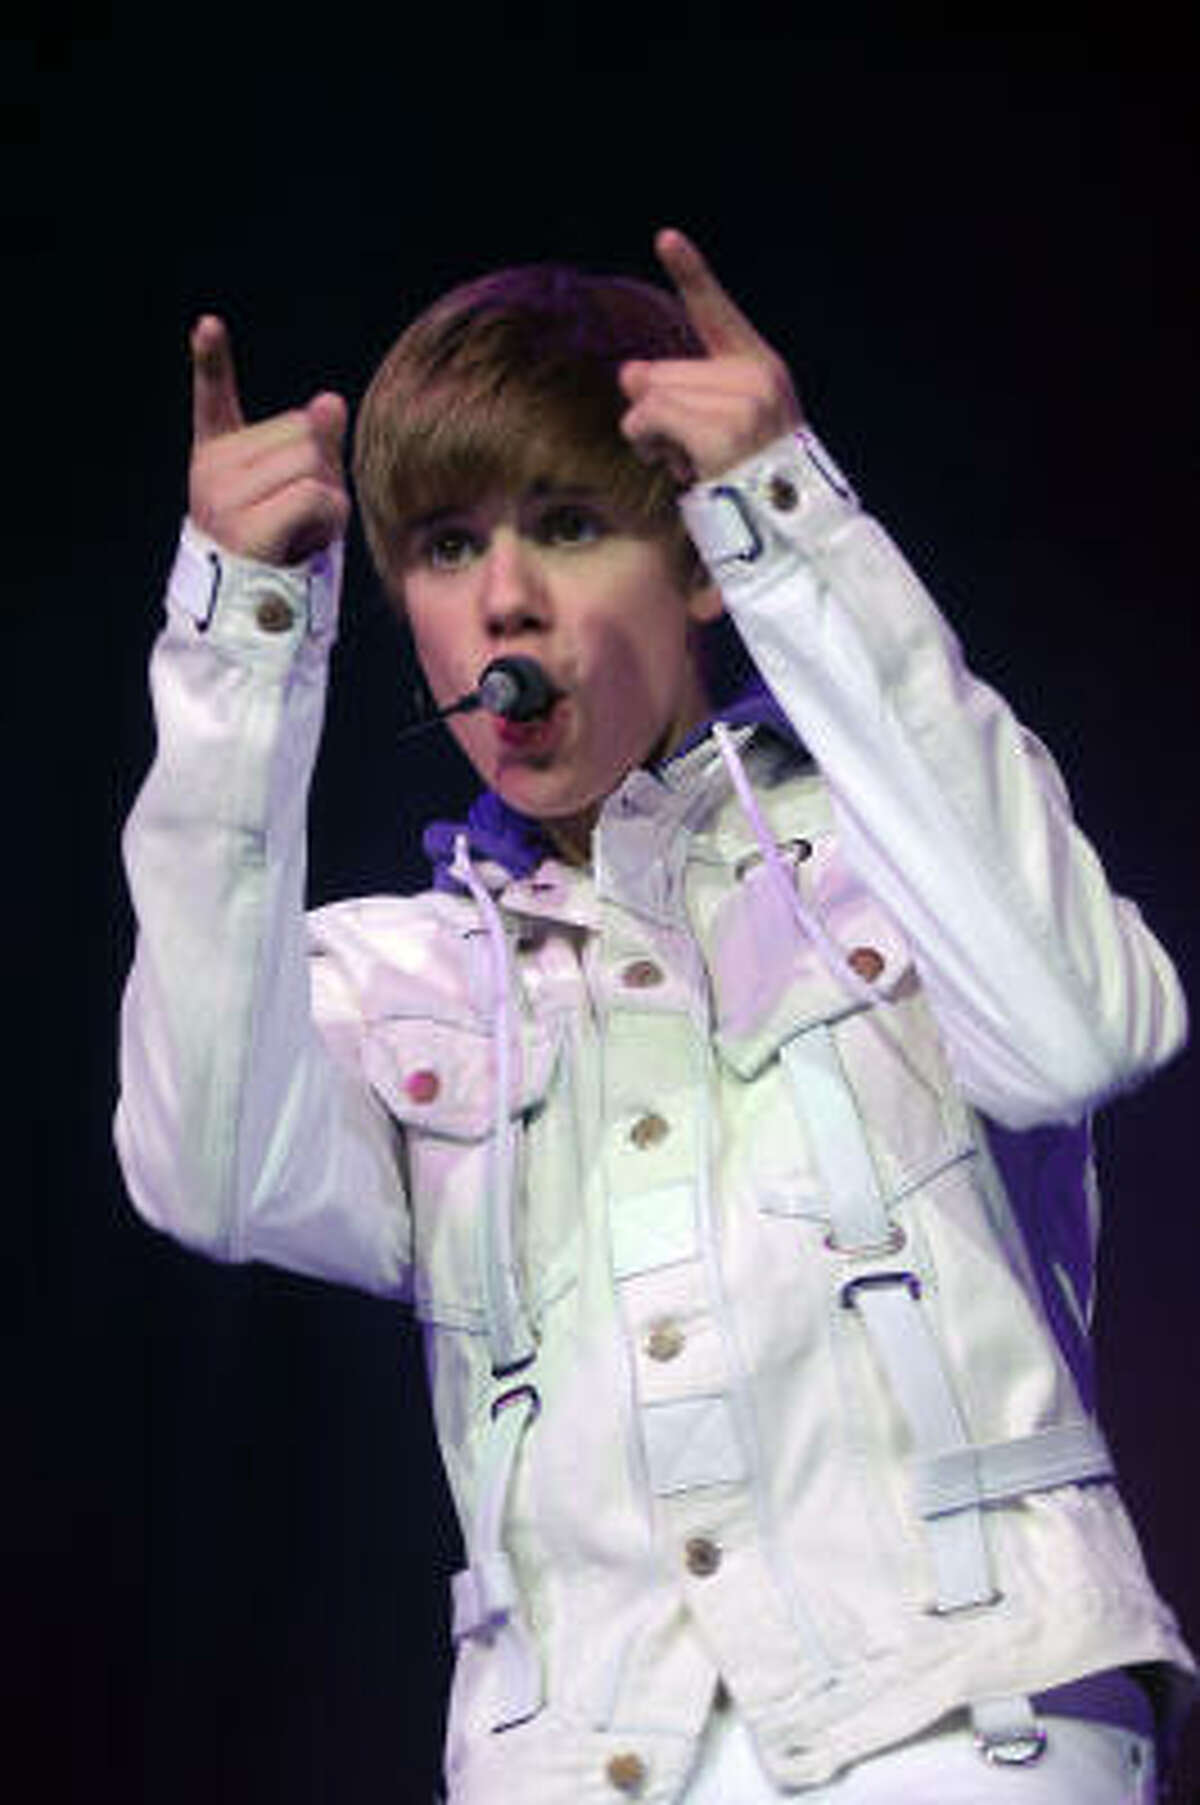 Justin Bieber performs in front of a sold-out crowd that likely included plenty of screaming girls.